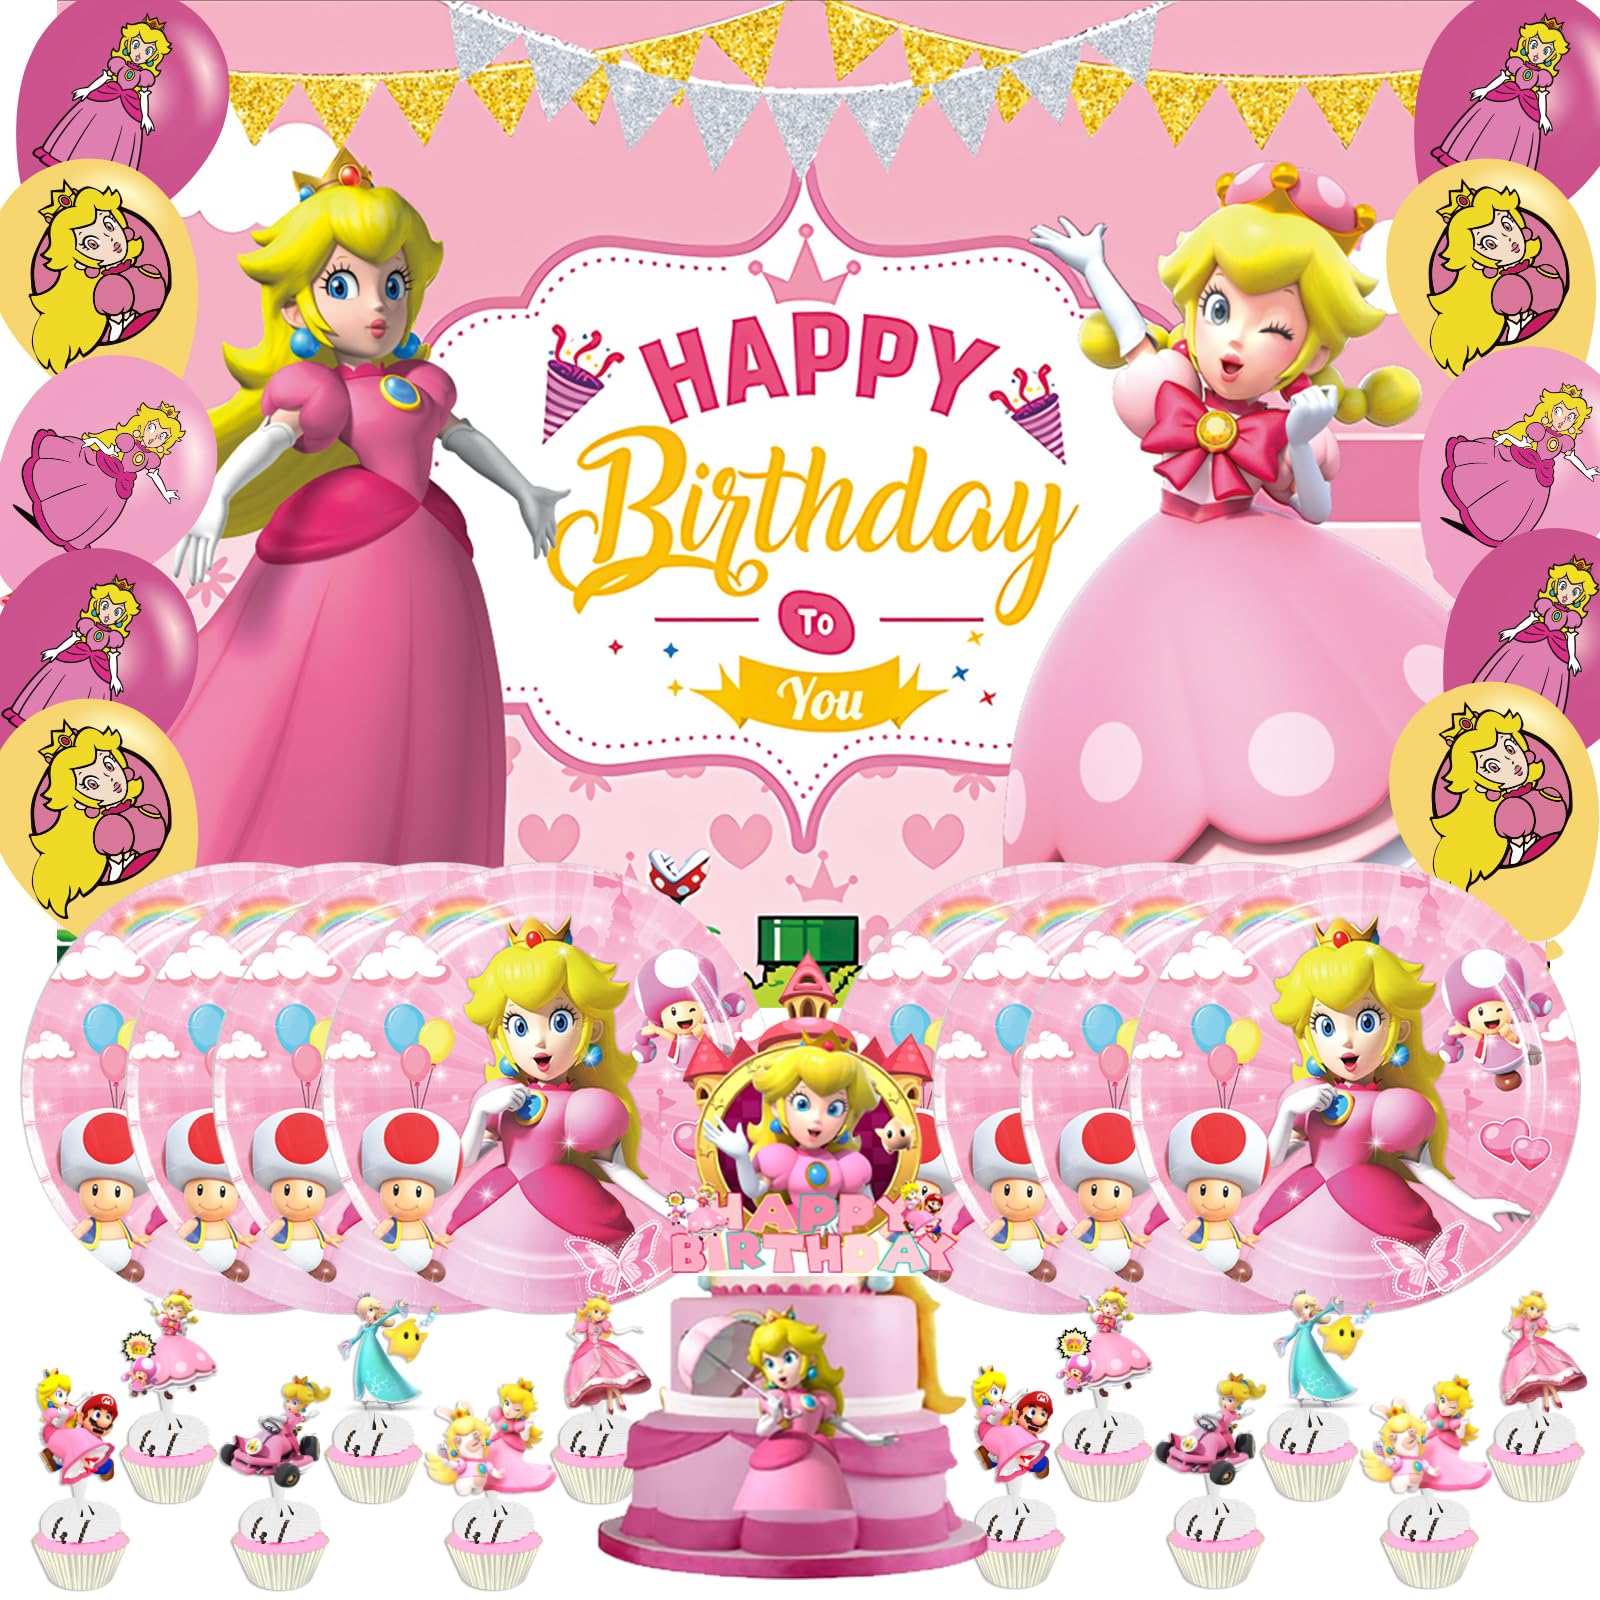 51 Pcs Princess Peach Birthday Party Decoration,Princess Peach Party Supplies Include Happy Birthday Backdrop,paper plates,cake toppers and latex balloons